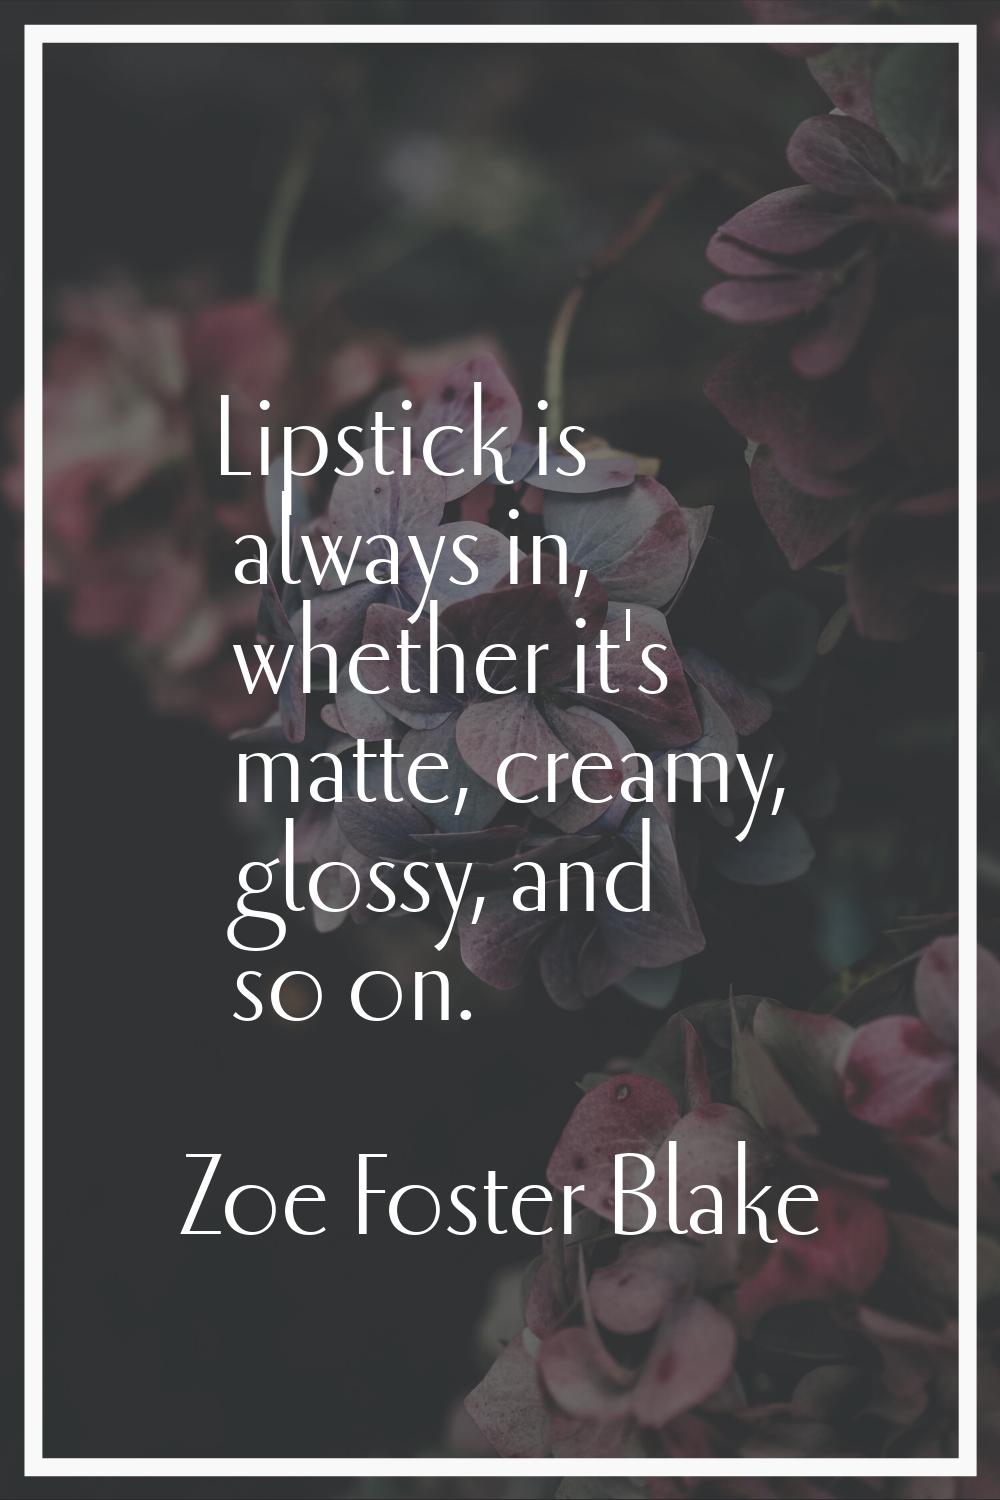 Lipstick is always in, whether it's matte, creamy, glossy, and so on.